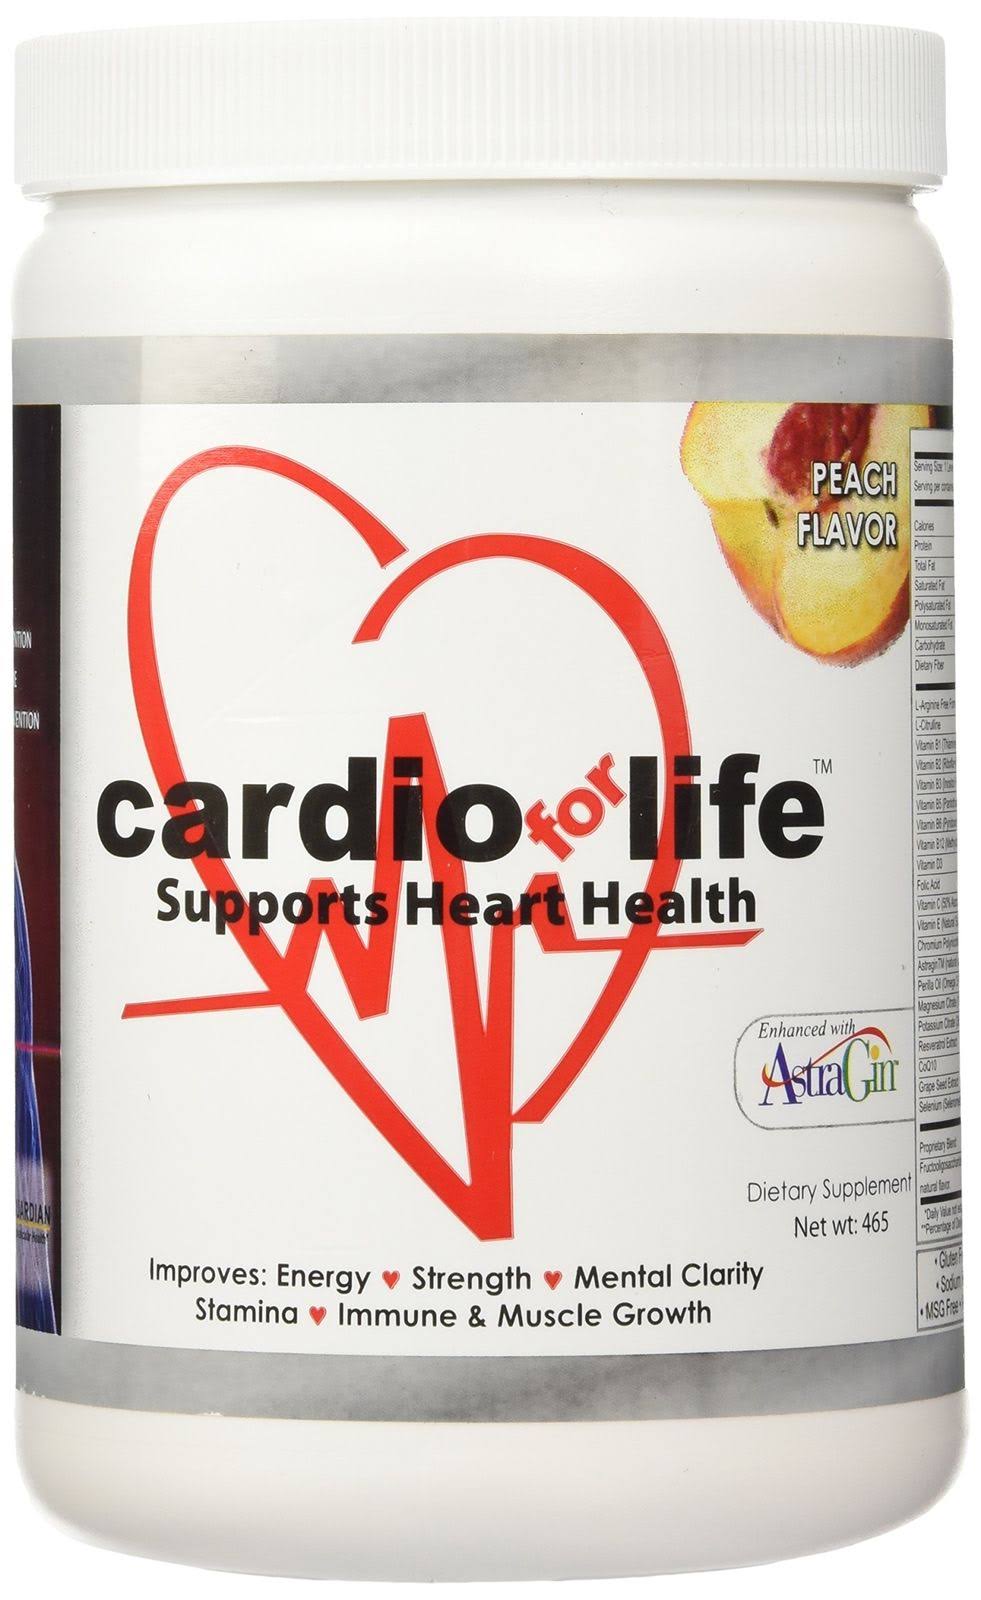 Cardio for Life Powder Supplement - with Astra Gin, Peach Flavor, 16oz